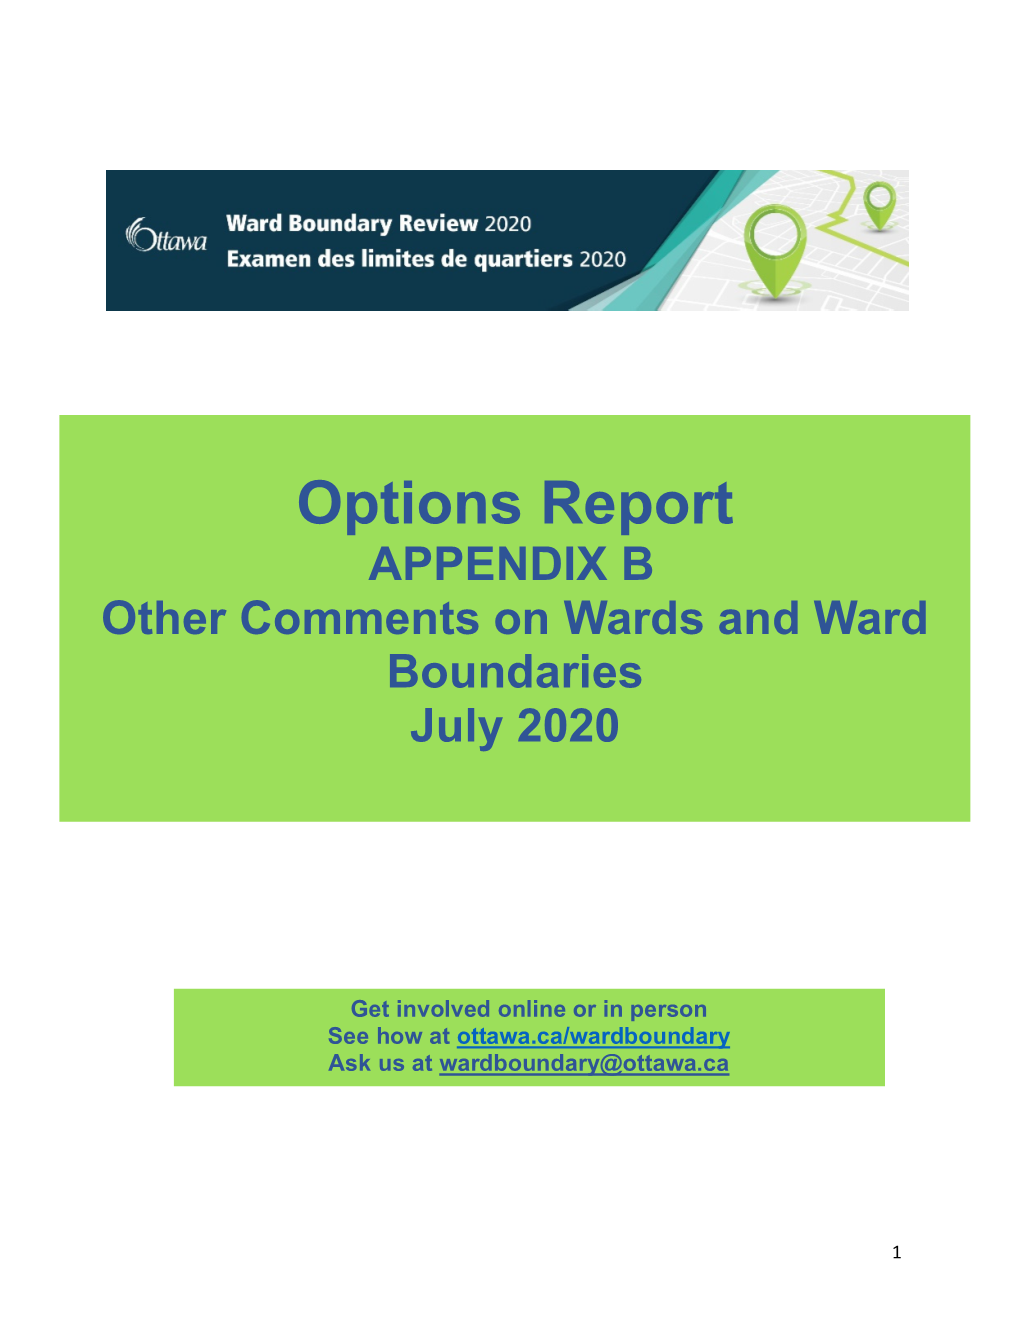 APPENDIX B Other Comments on Wards and Ward Boundaries July 2020